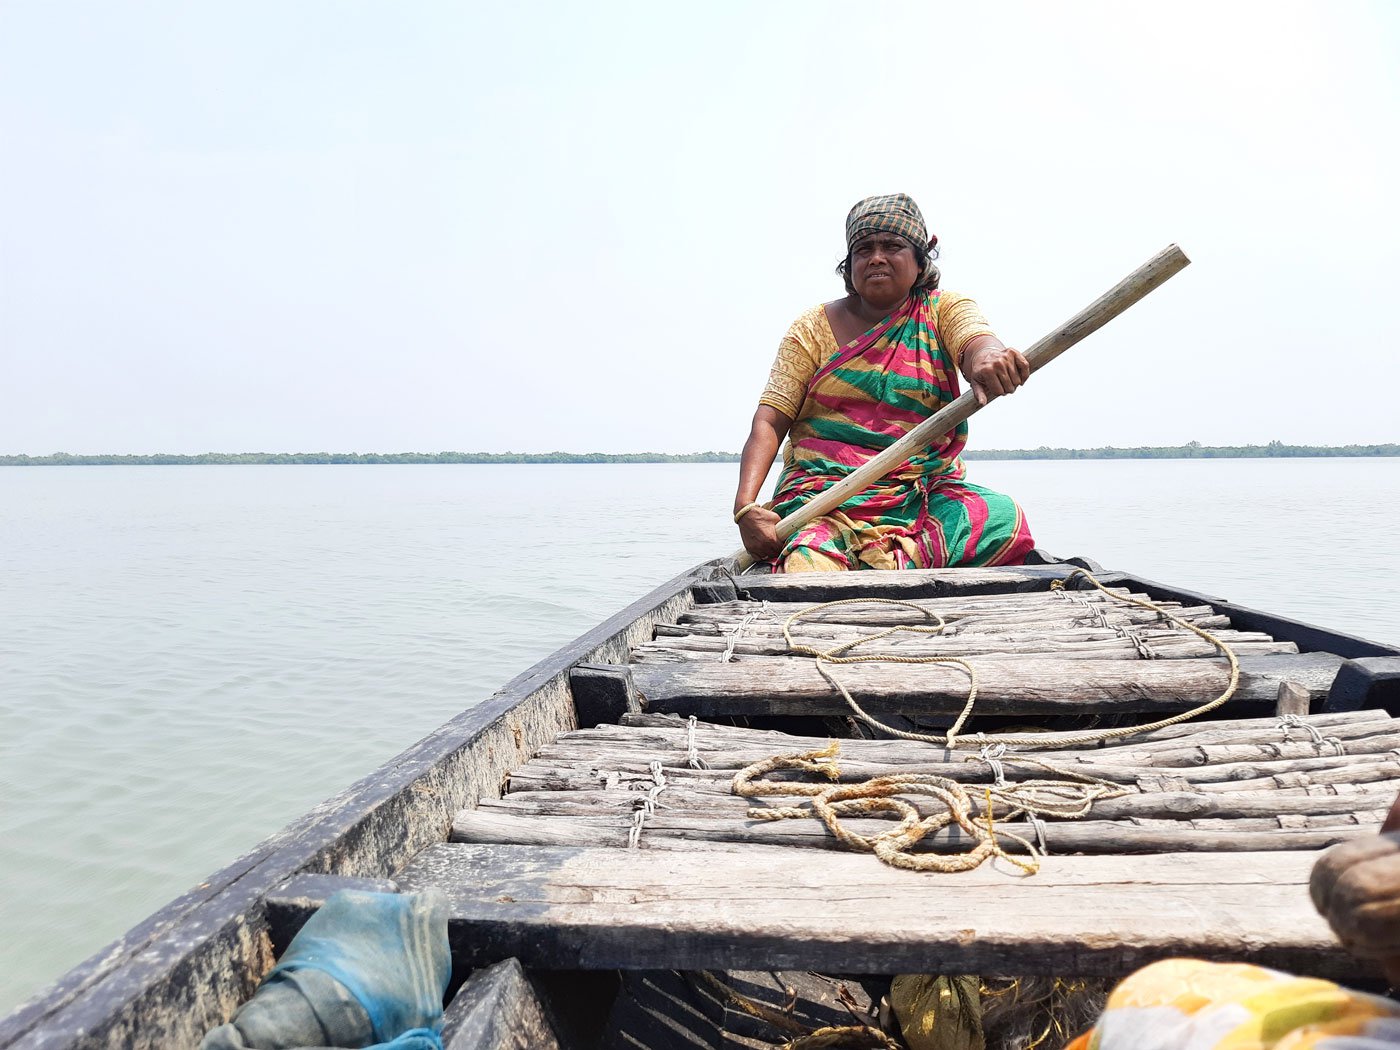 "We do not leave the boat under any circumstances, not even to go to the toilet,” says Parul